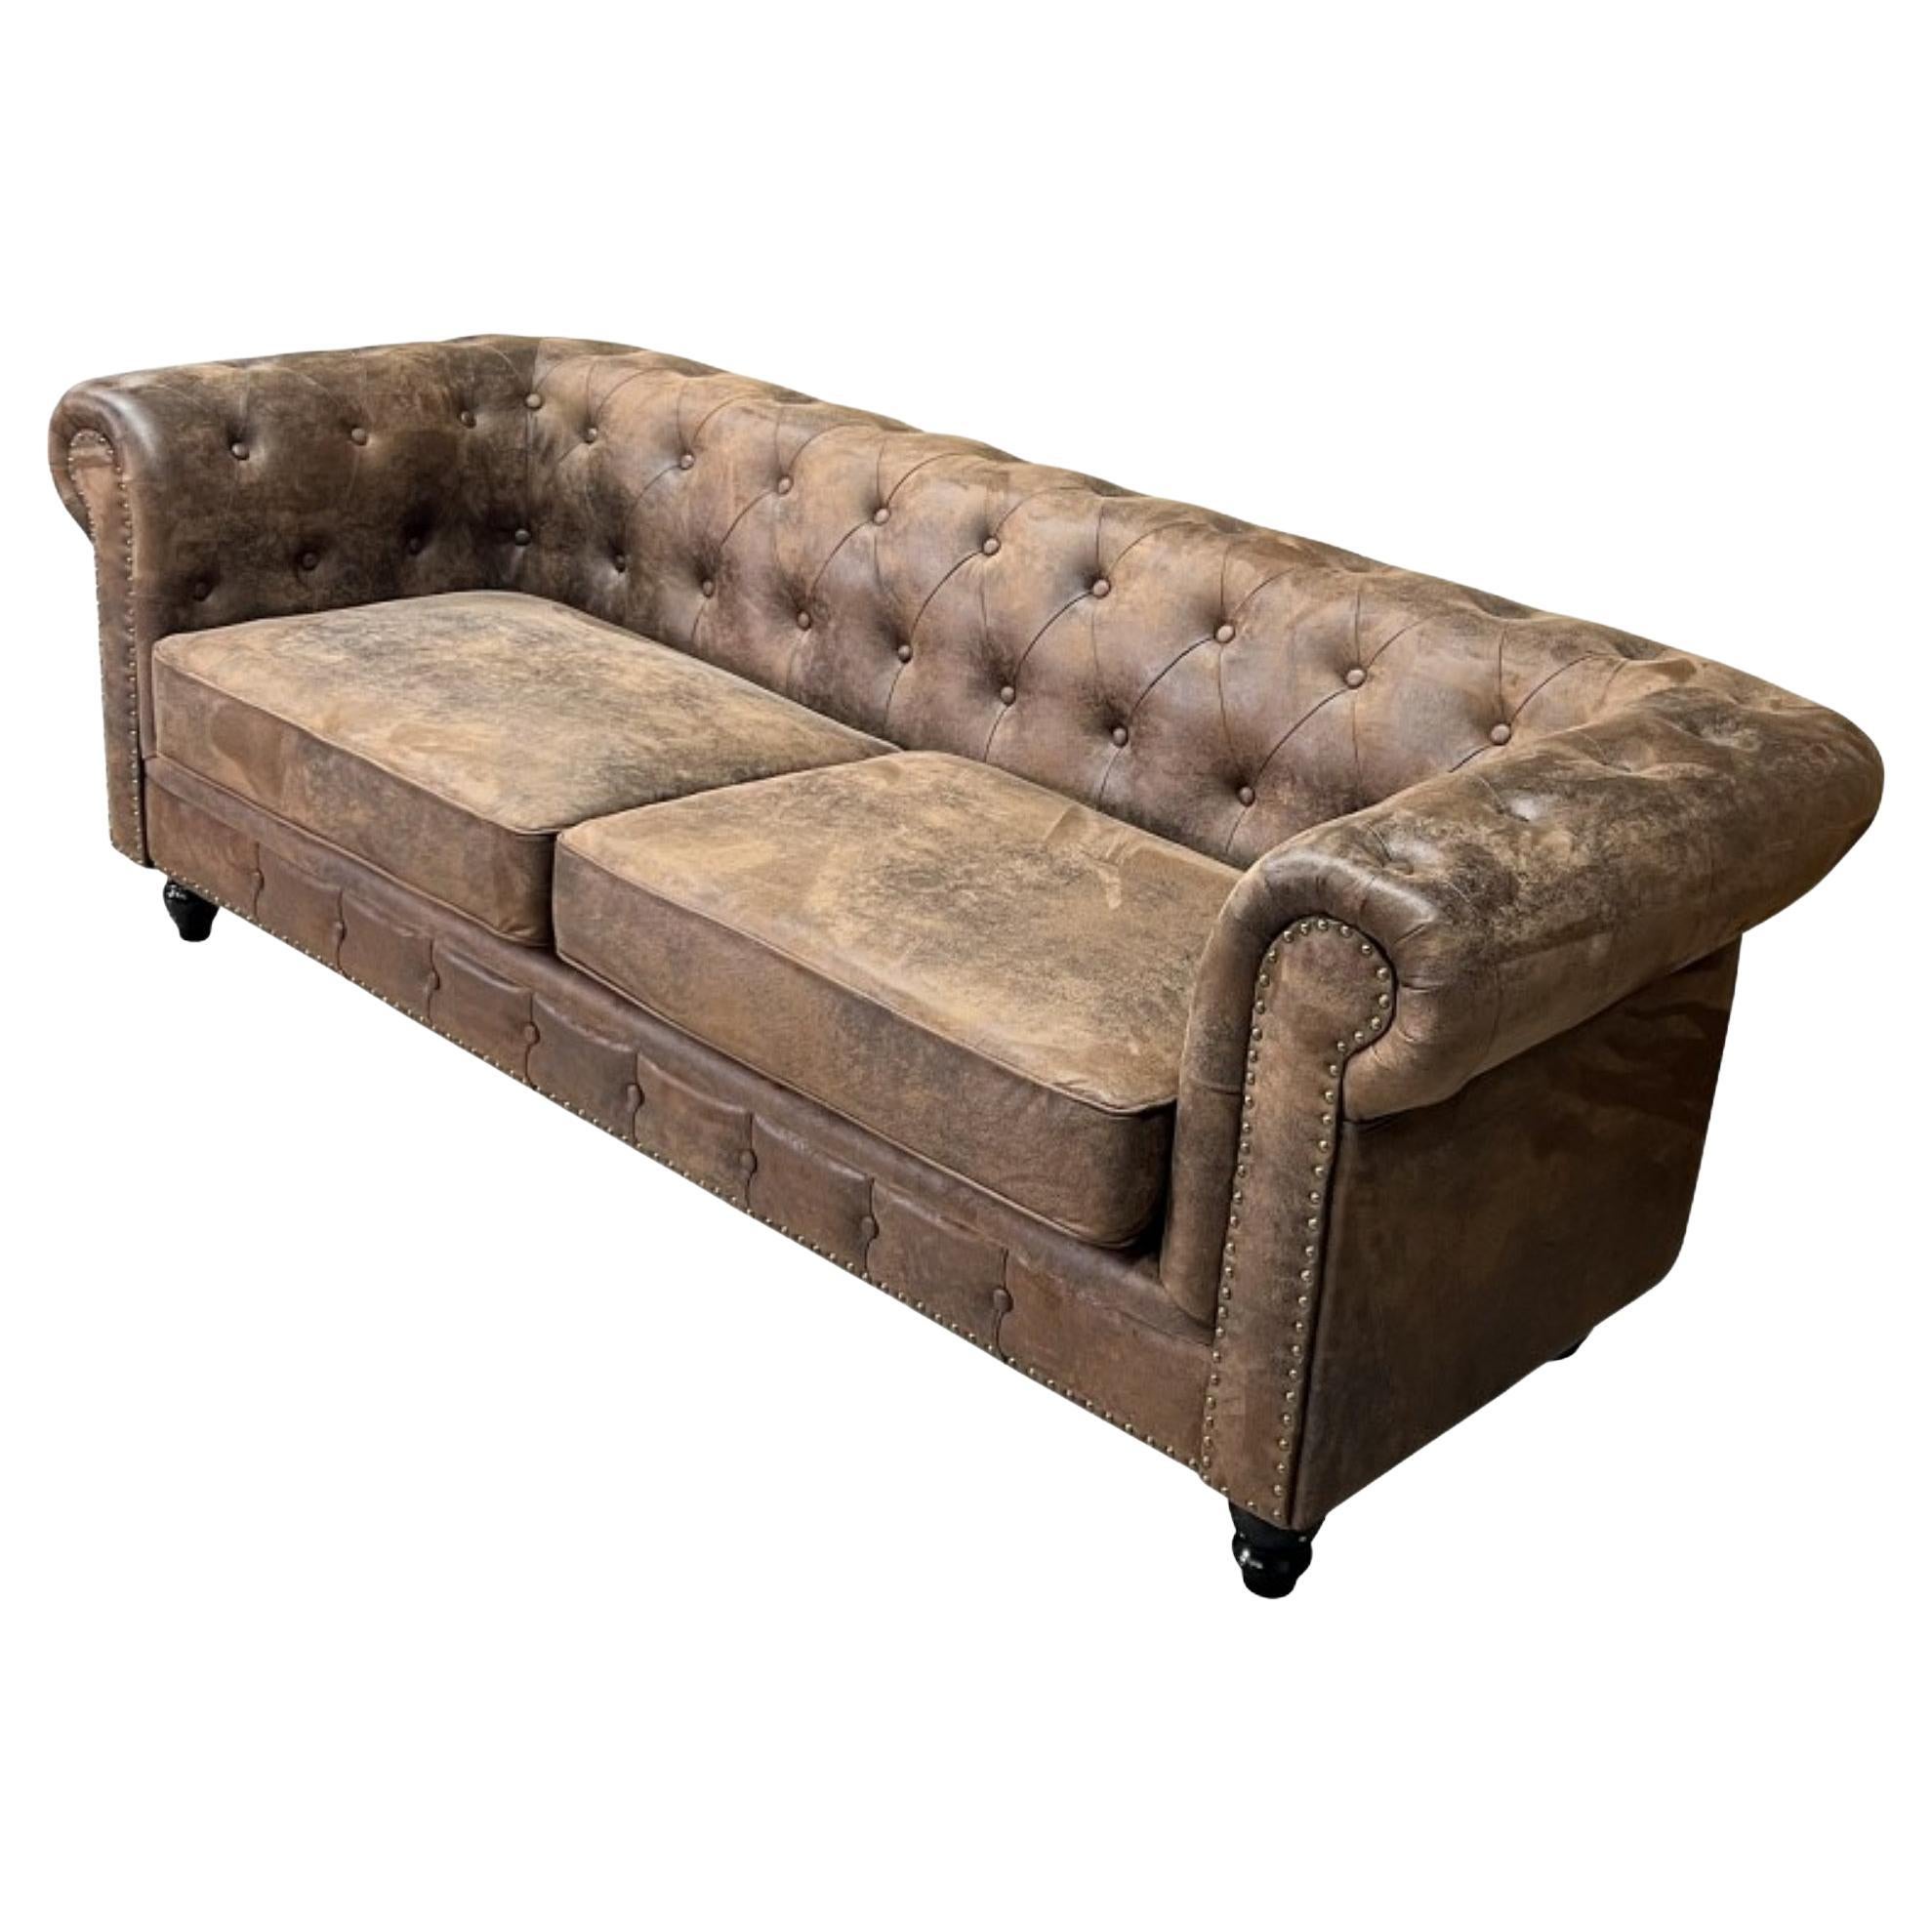 New Chester Premium 3 Seater Sofa Vintage Faux Leather For Sale